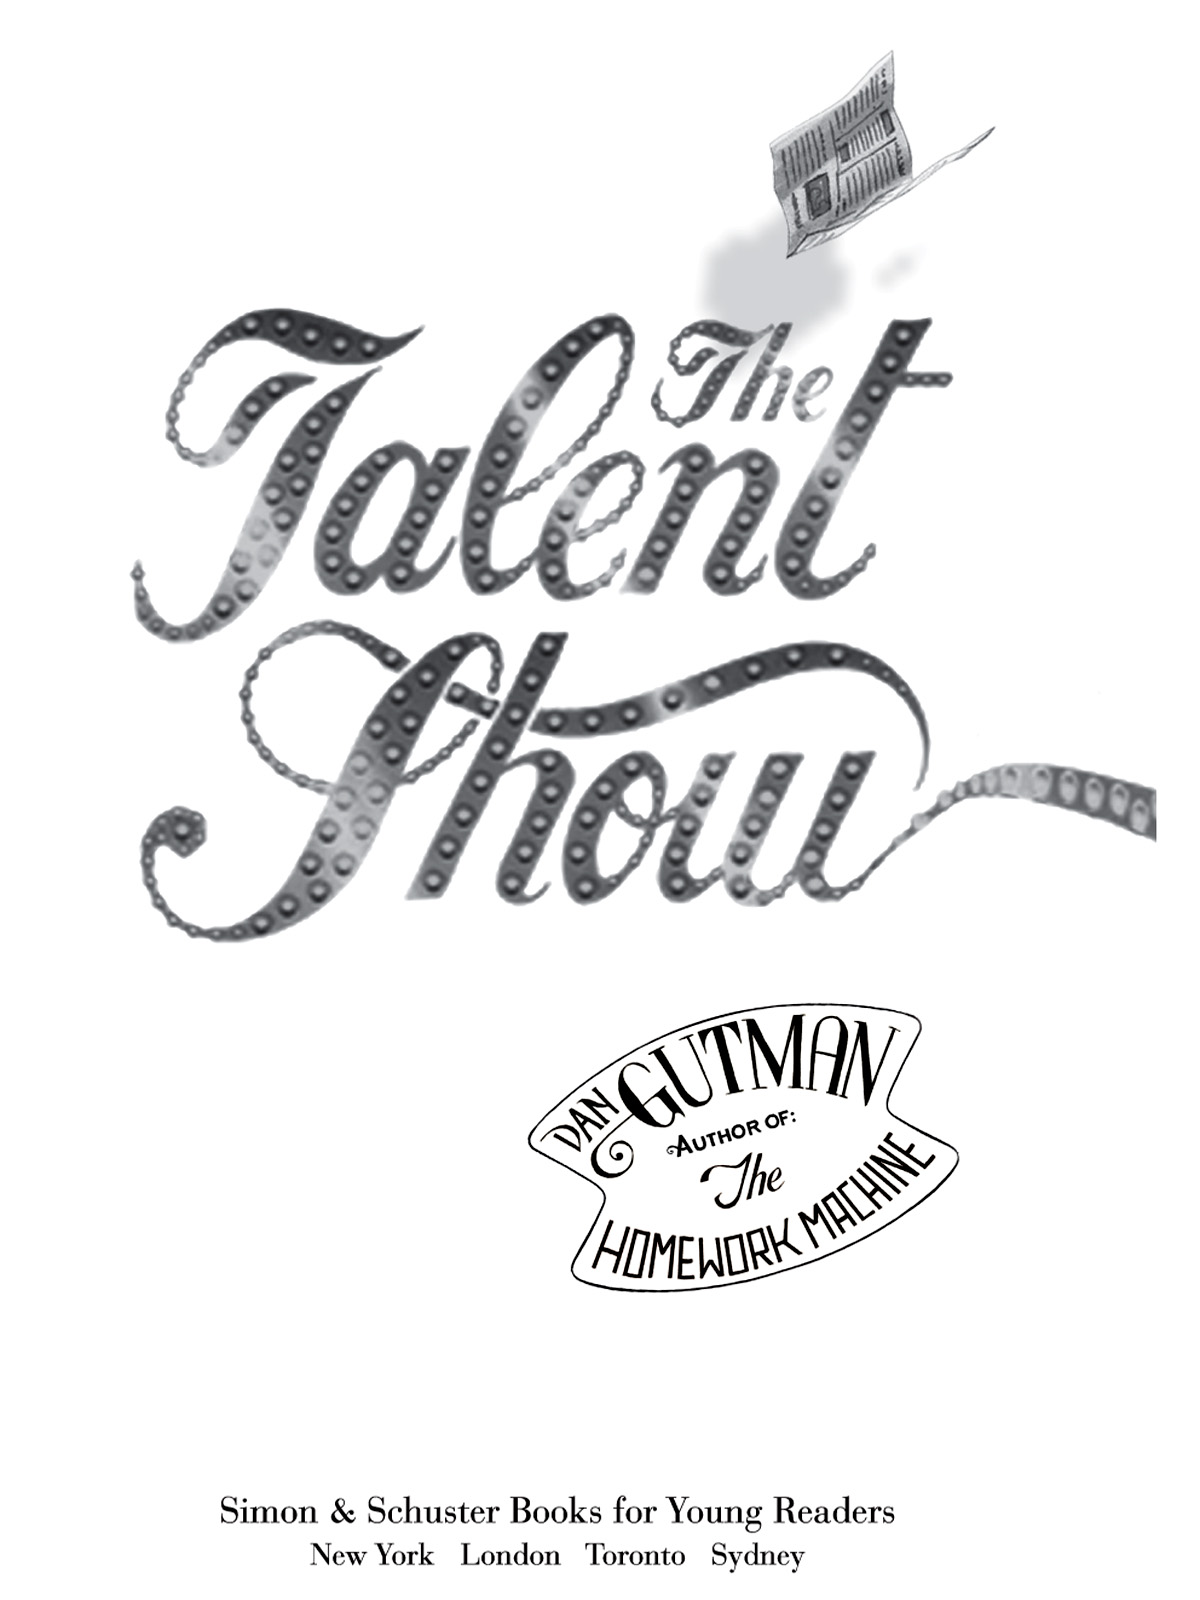 The Talent Show (2010) by Dan Gutman